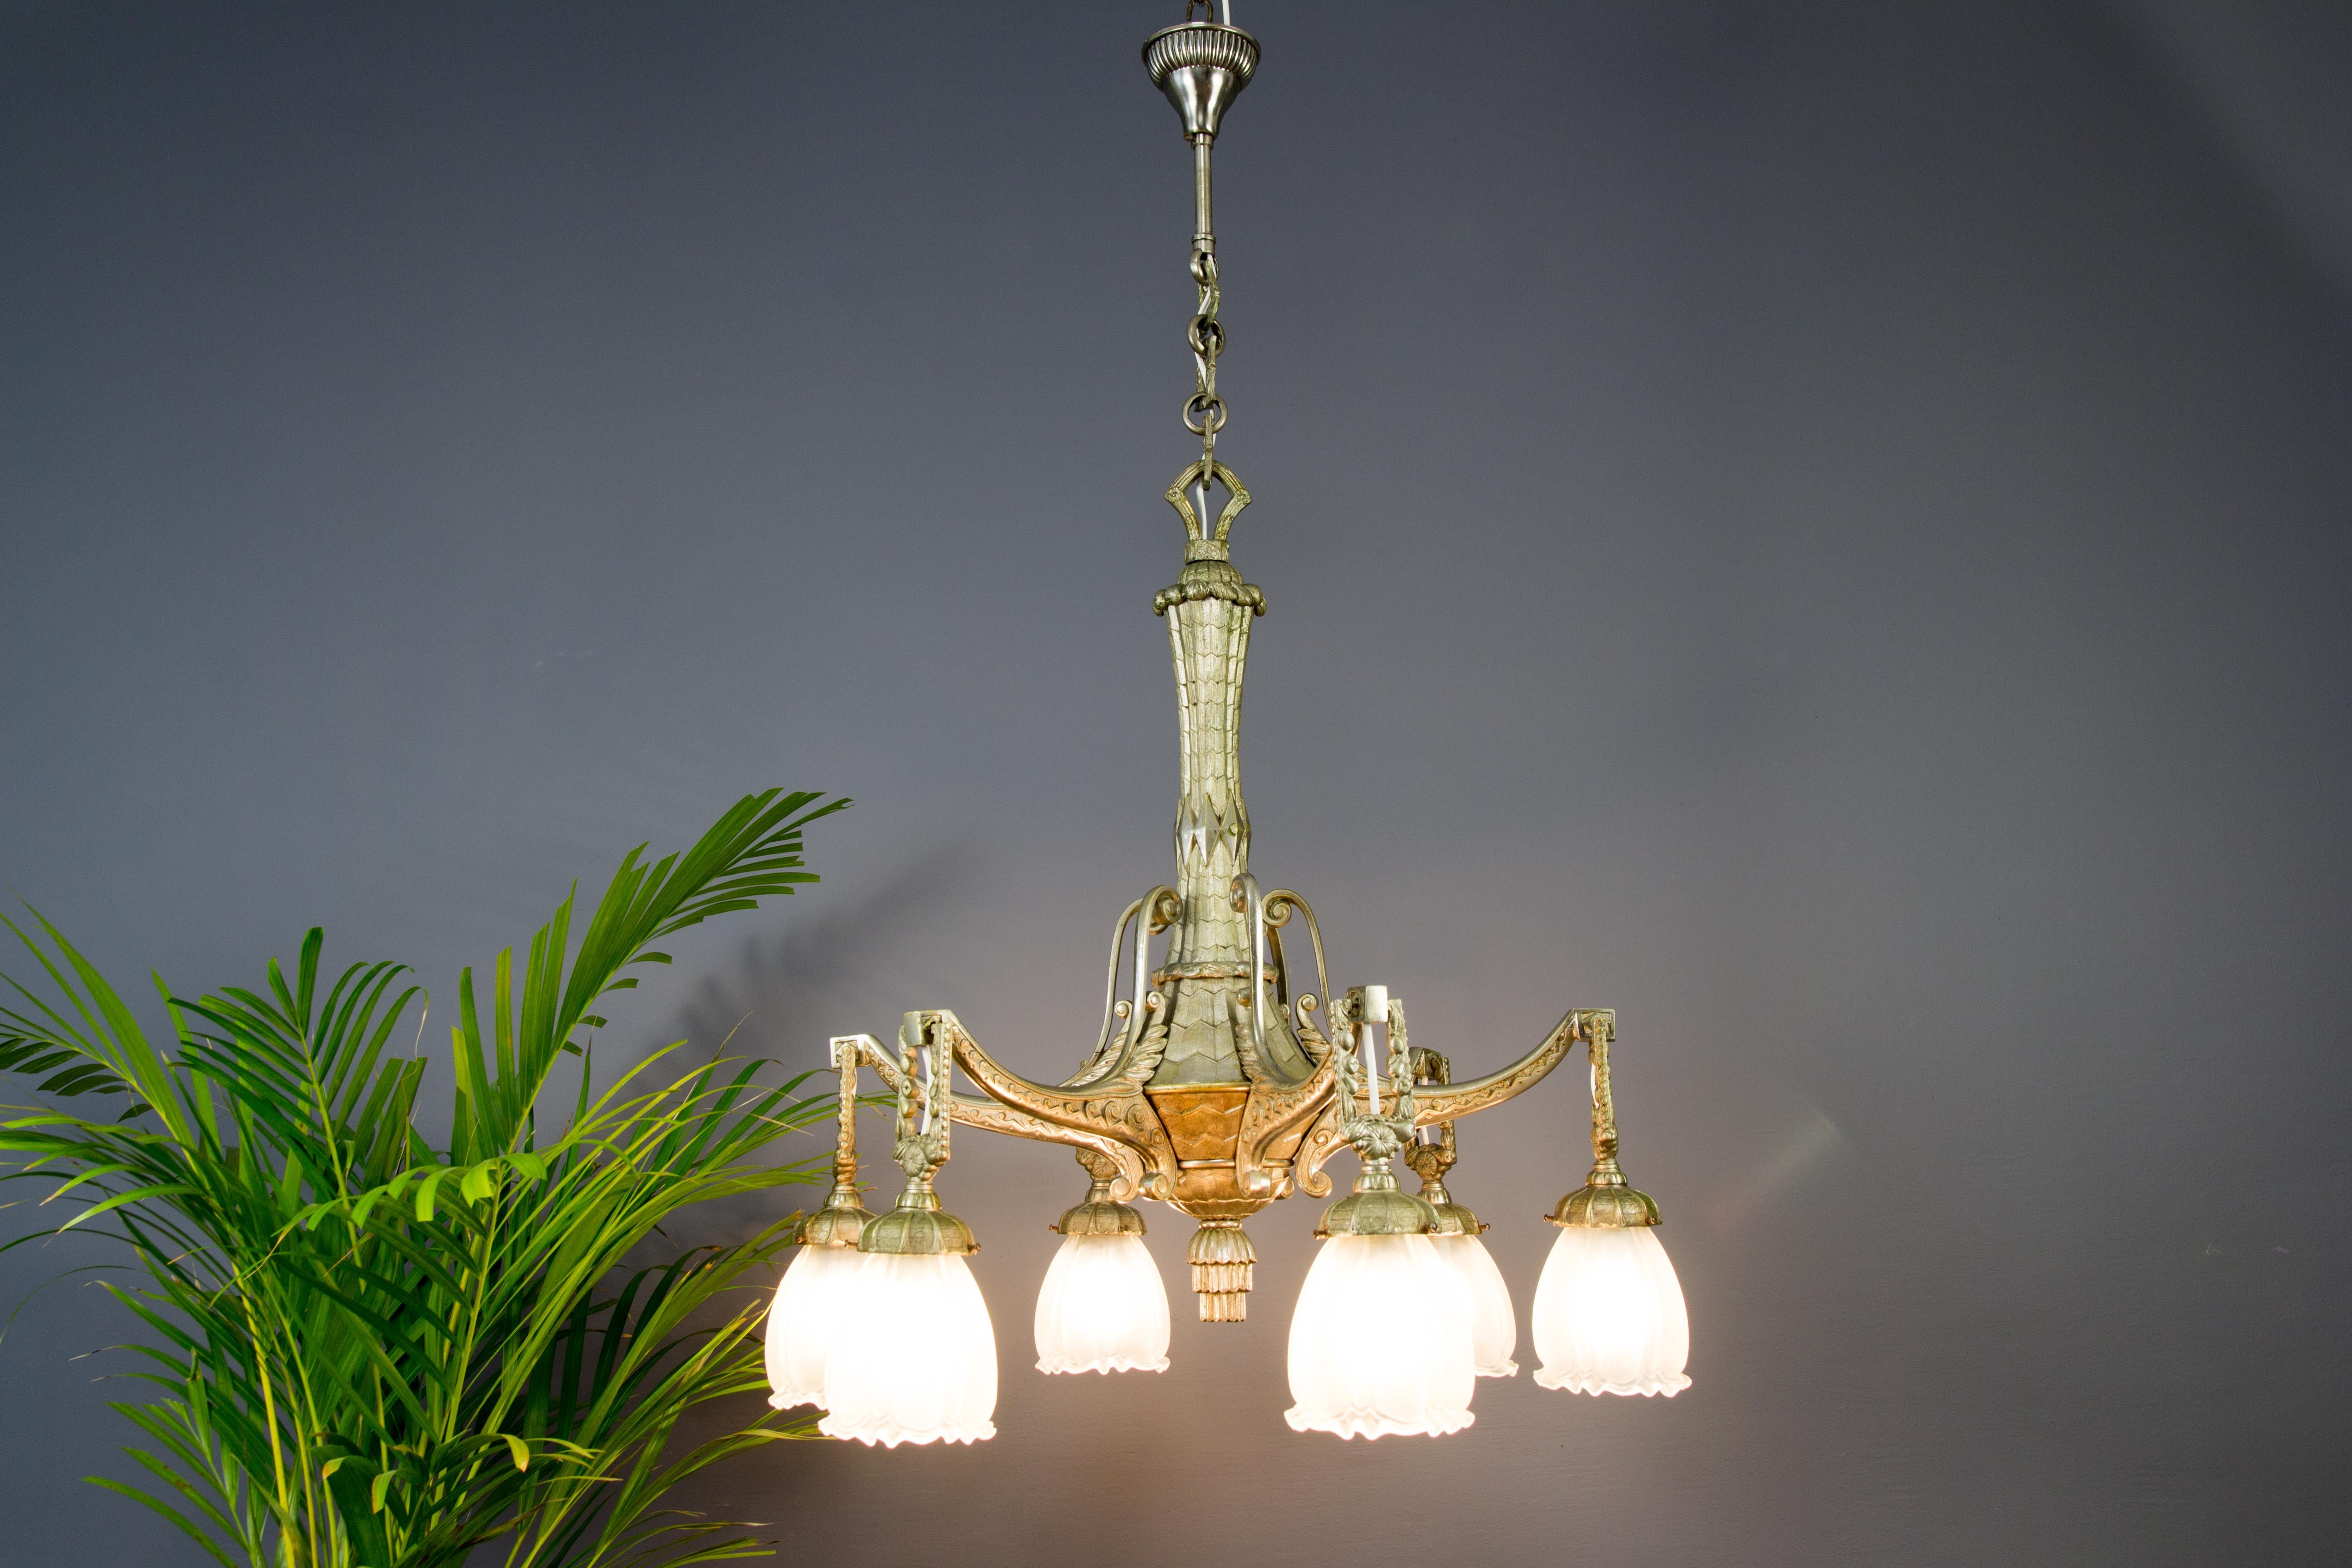 Beautiful French Art Deco style silver color bronze chandelier from the 1920s. Six bronze arms decorated with Art Deco ornaments, each with frosted glass lamp shade and a socket for E 27 (E26) size light bulb.
Measures: Height is 36.22 inches / 92